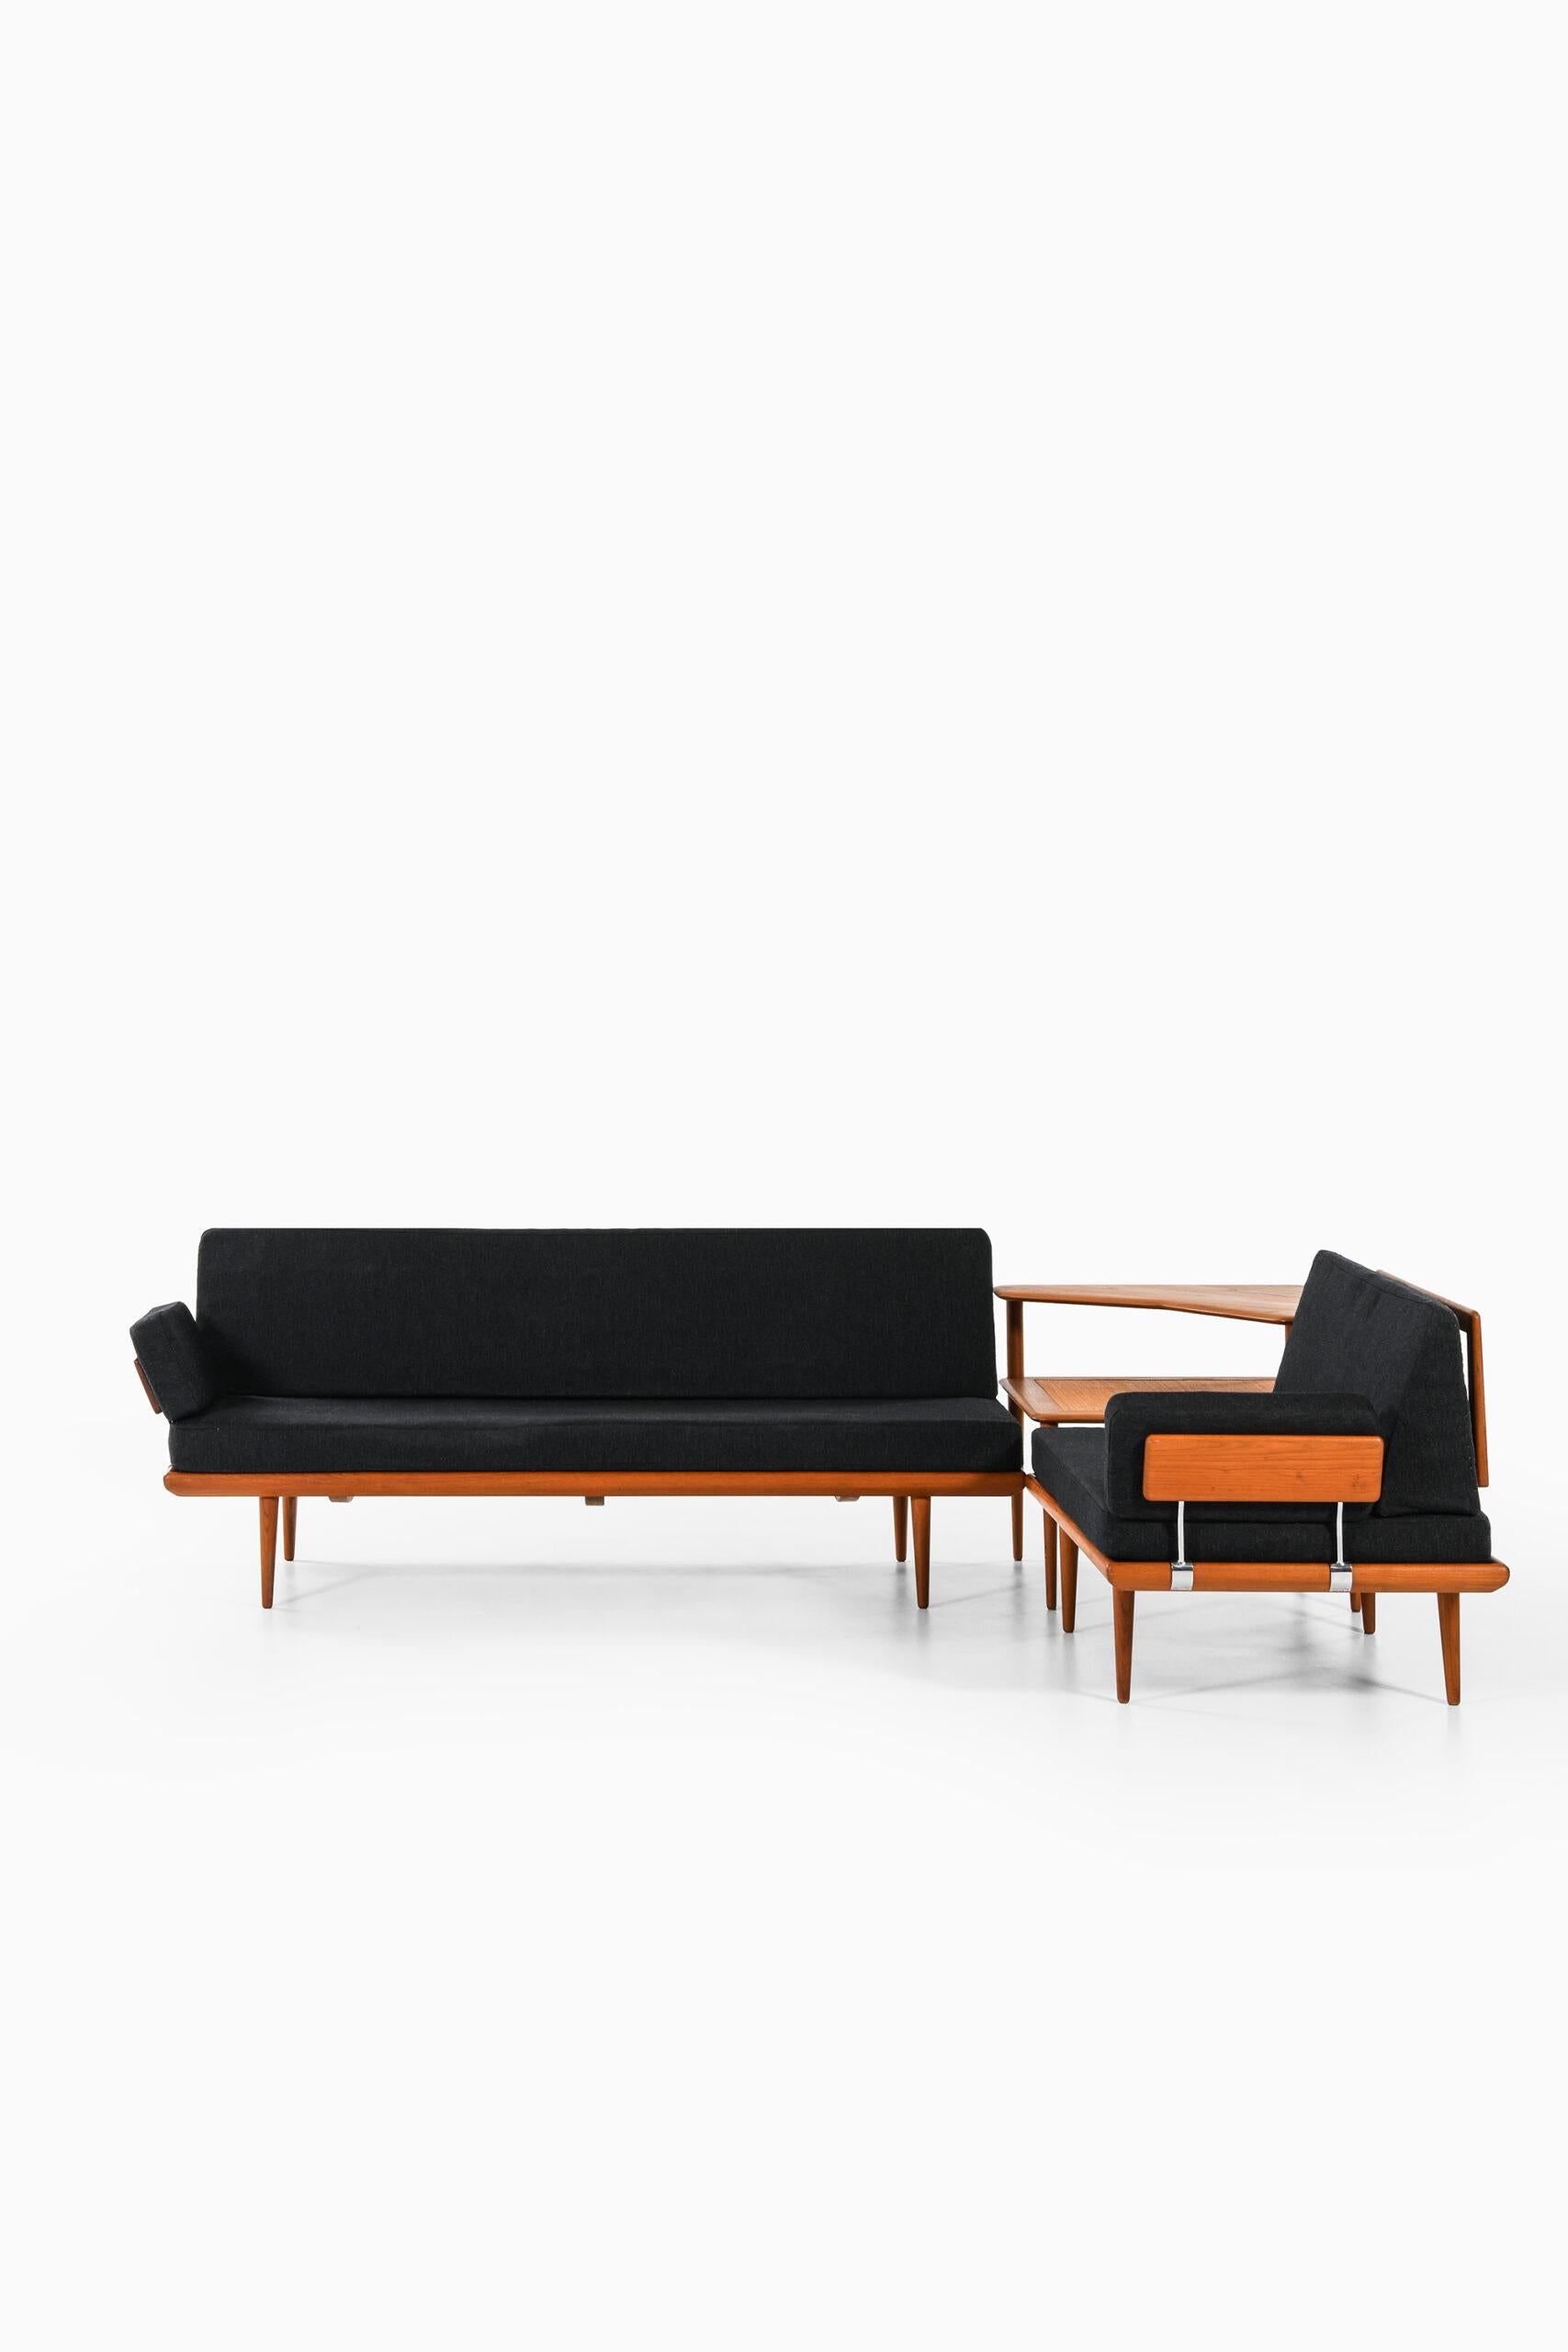 Sofa model Minerva designed by Peter Hvidt & Orla Mølgaard-Nielsen. Produced by France & Daverkosen in Denmark. Seating group with 3 seater, 2 seater and side table.
Dimensions: 3-seater (W x D x H): 190 x 77 x 79 cm, SH: 40 cm.
Dimensions: